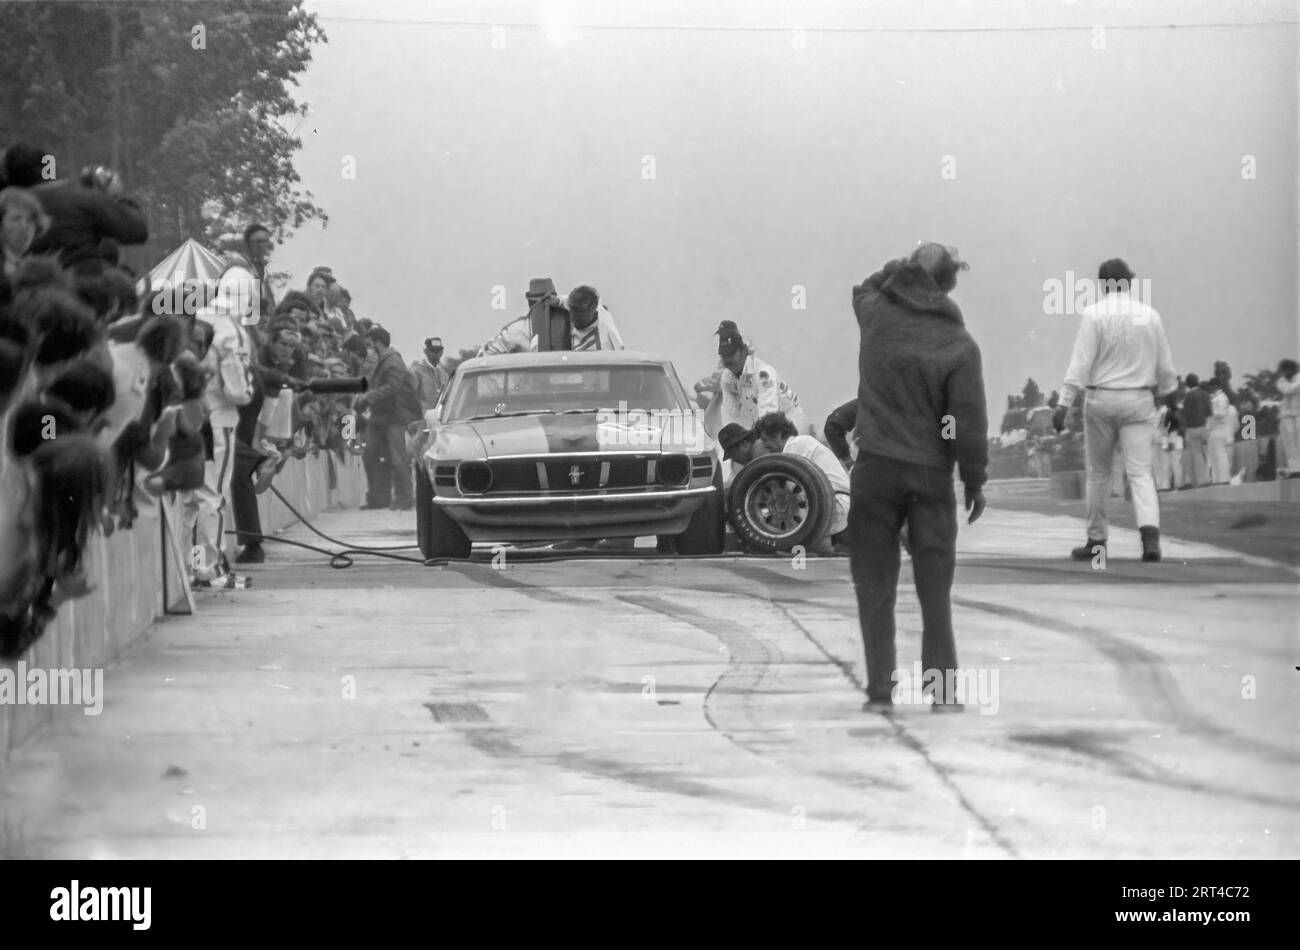 1971 Watkins Glen Trans Am, George Follmer, Bud Moore, Ford Mustang Boss 302, Started 1st  , Finished 2nd Stock Photo